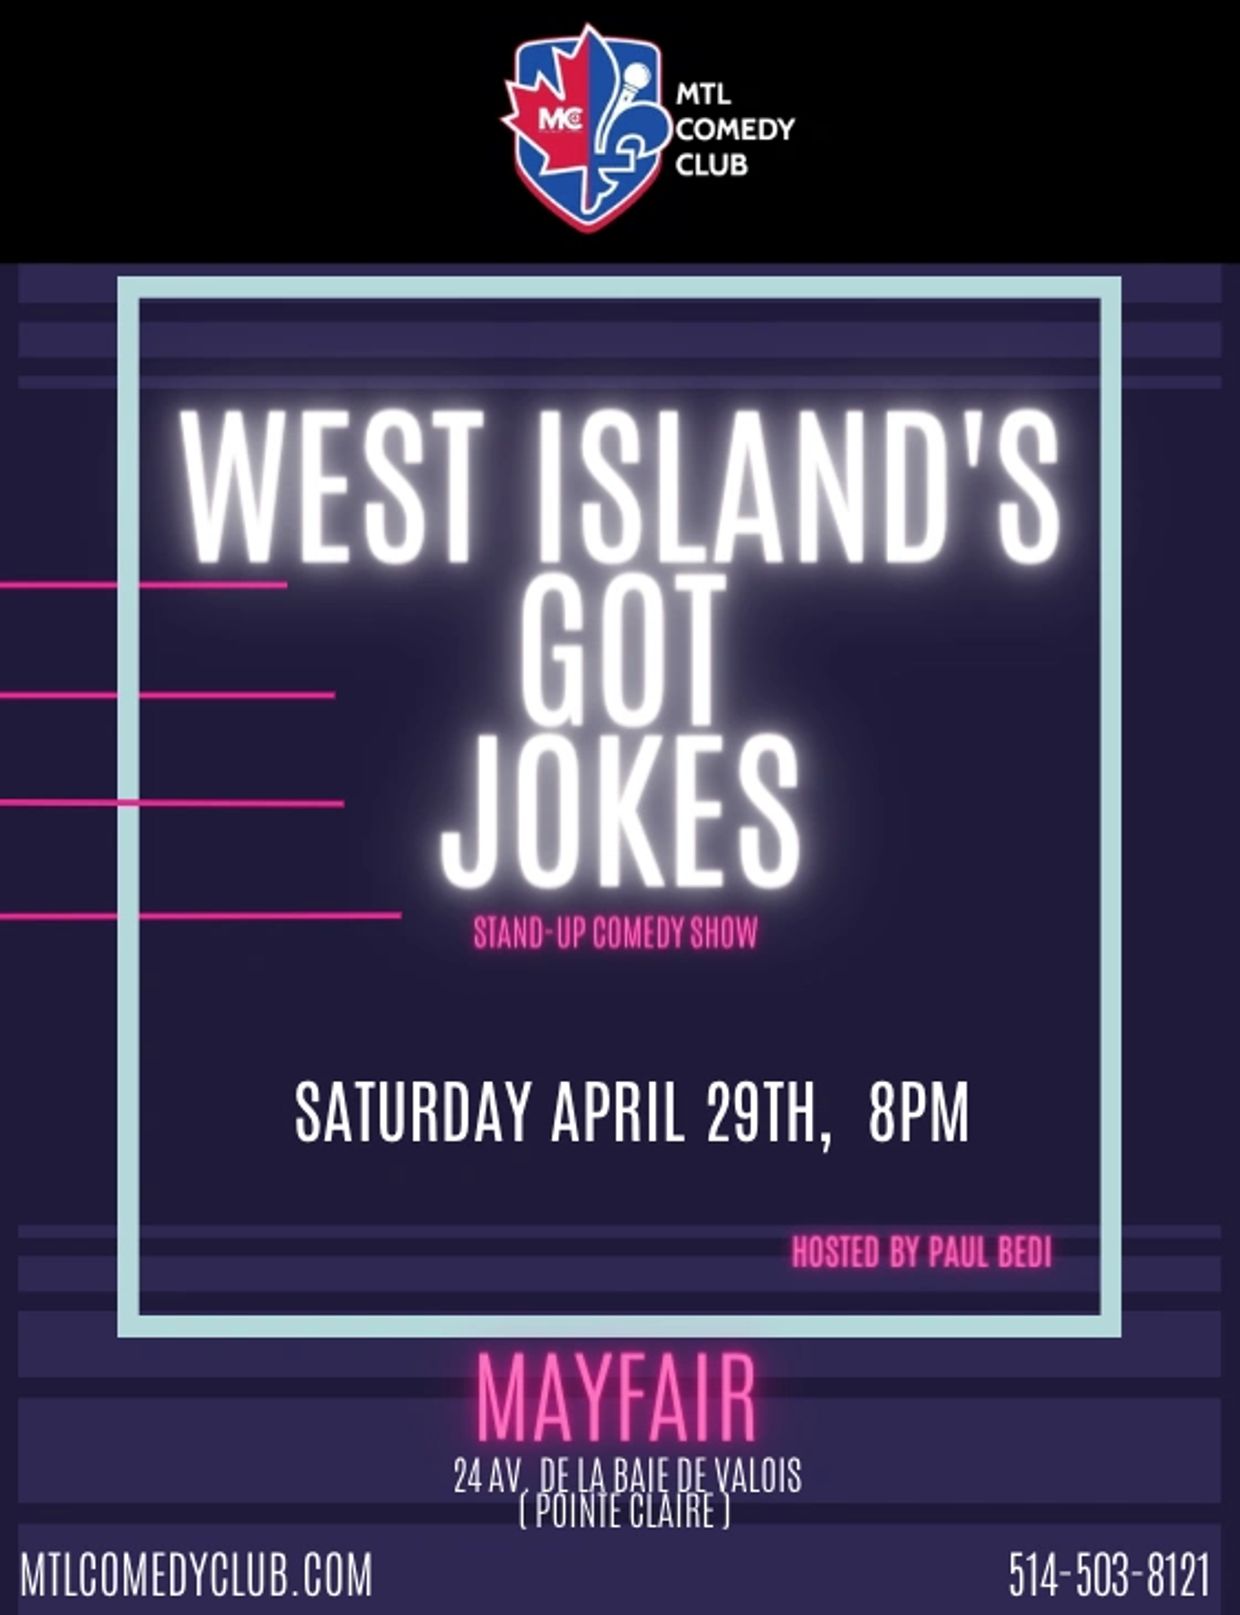 West Island's got jokes. A english stand-Up Comedy Show in the West Island of Montreal.